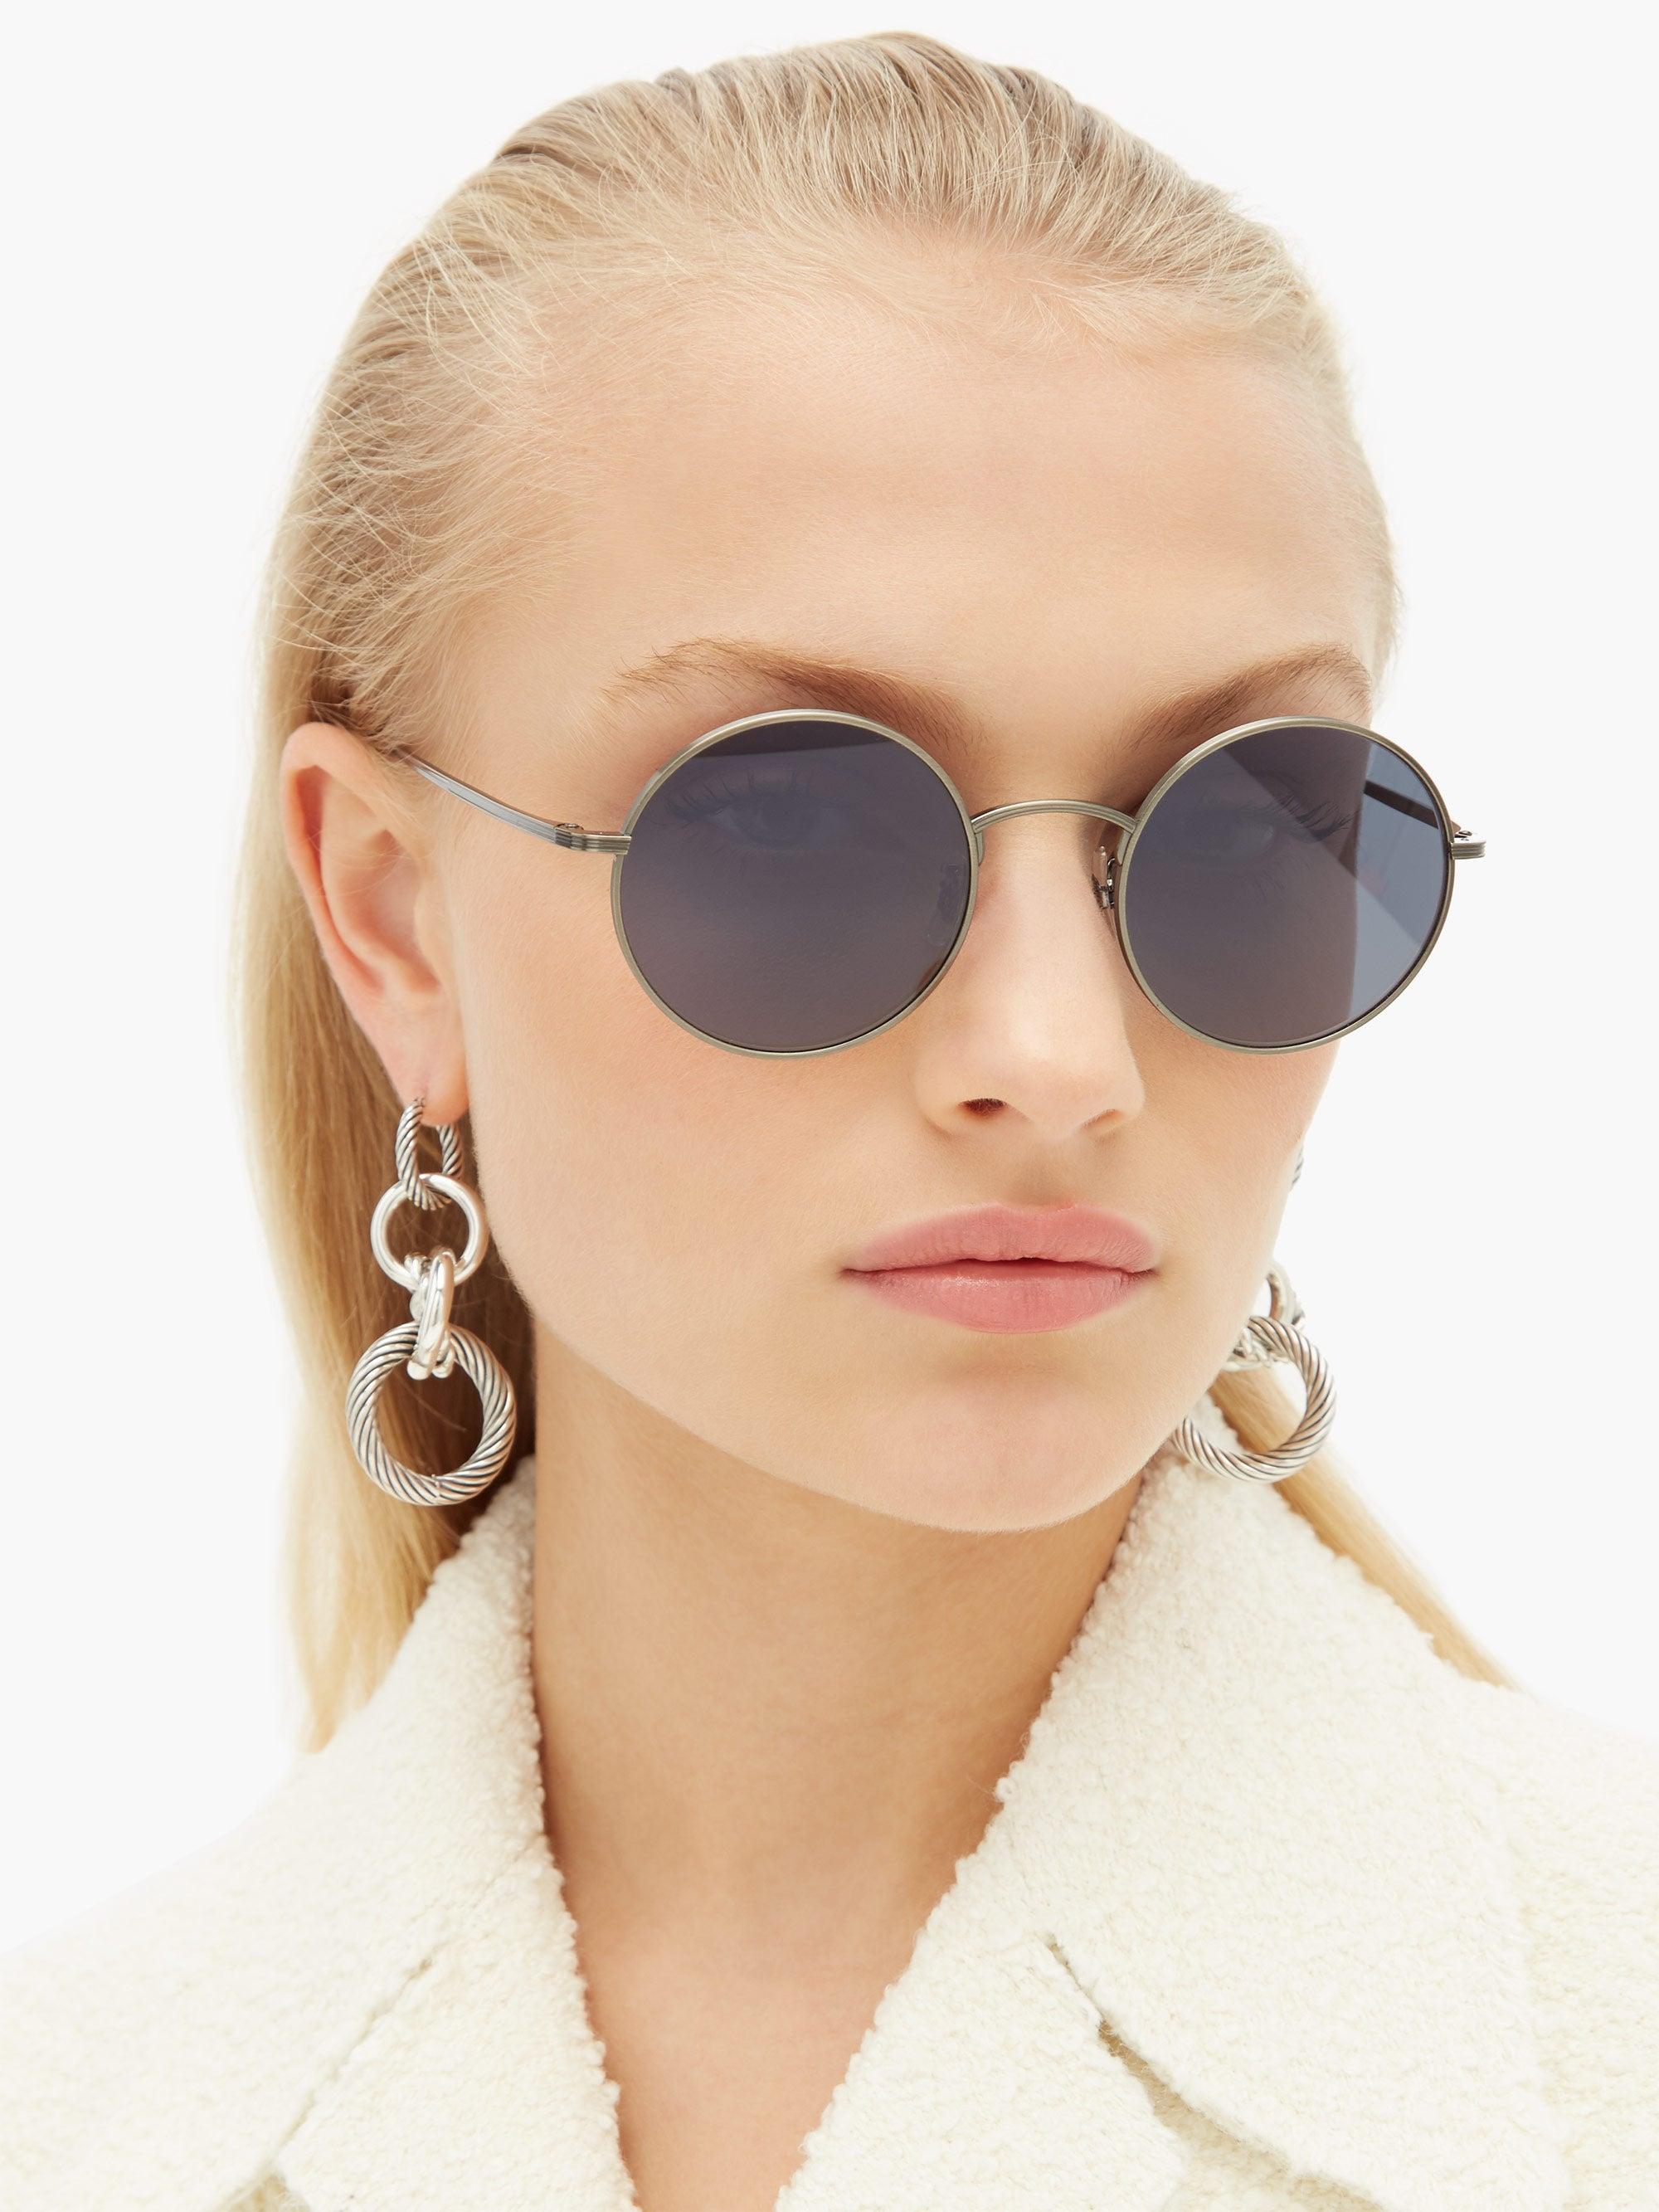 The Row X Oliver Peoples After Midnight Metal Sunglasses in Blue